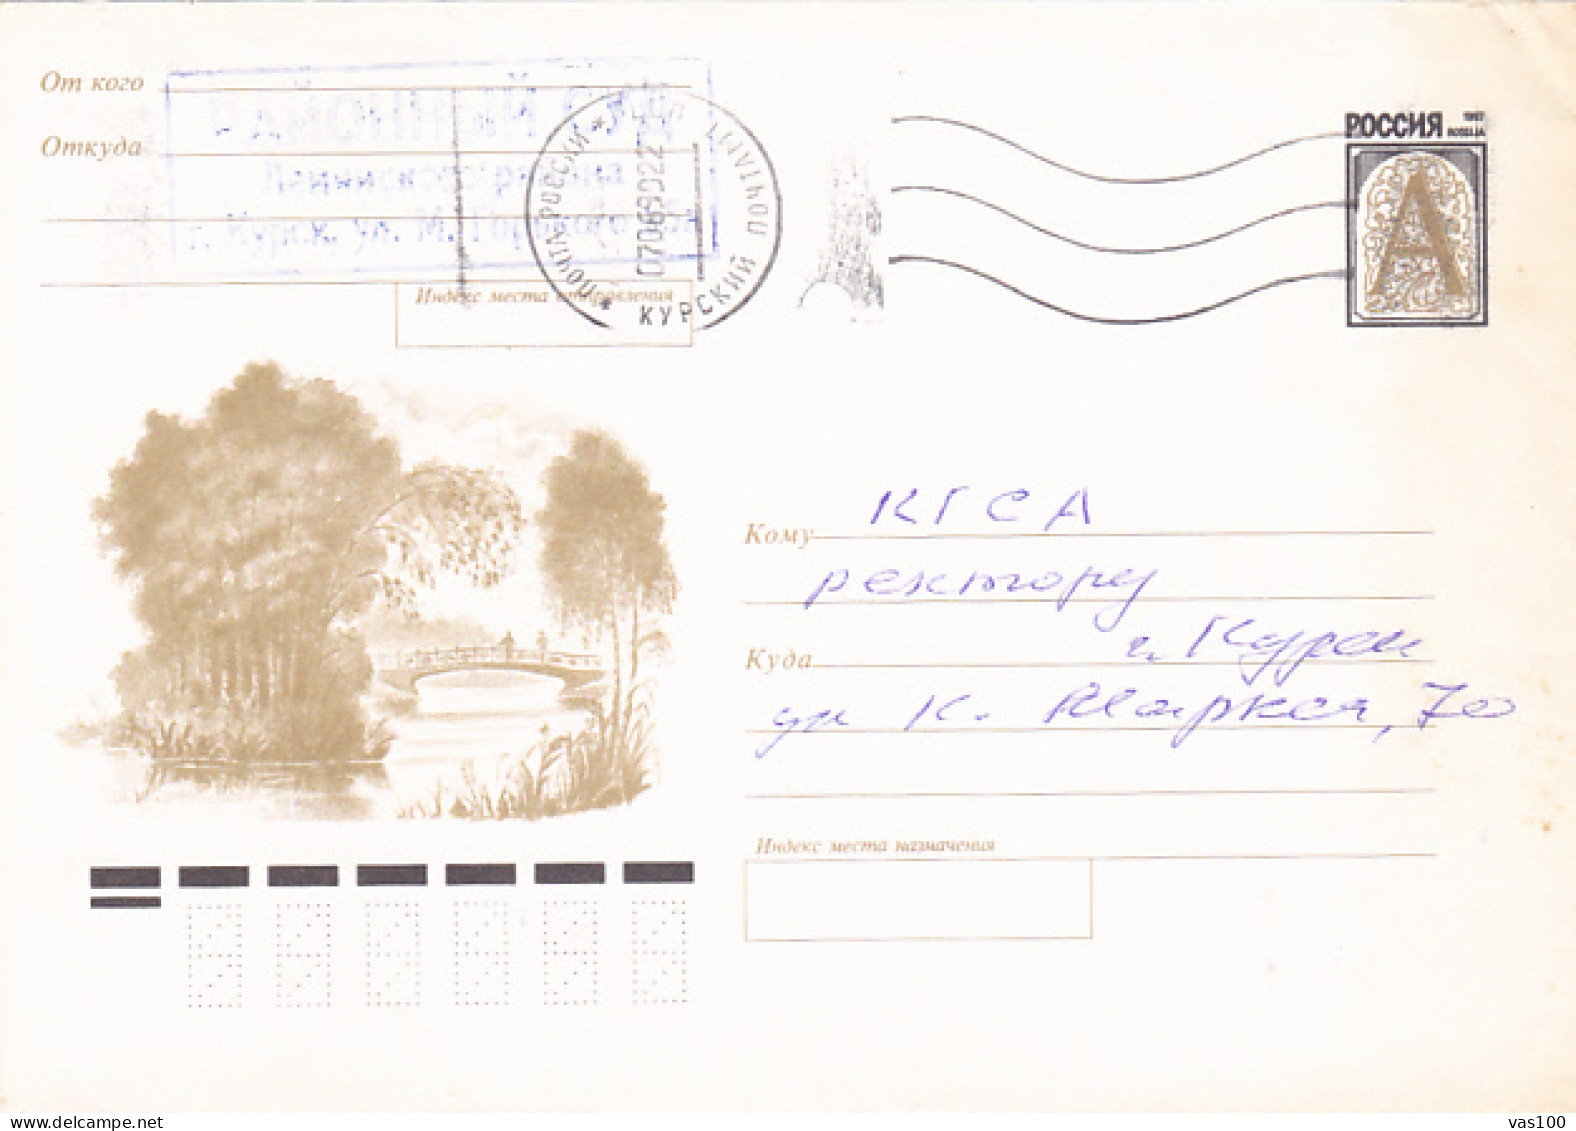 BRIDGE, LANDSCAPE, COVER STATIONERY, ENTIER POSTAL, 1998, RUSSIA - Stamped Stationery